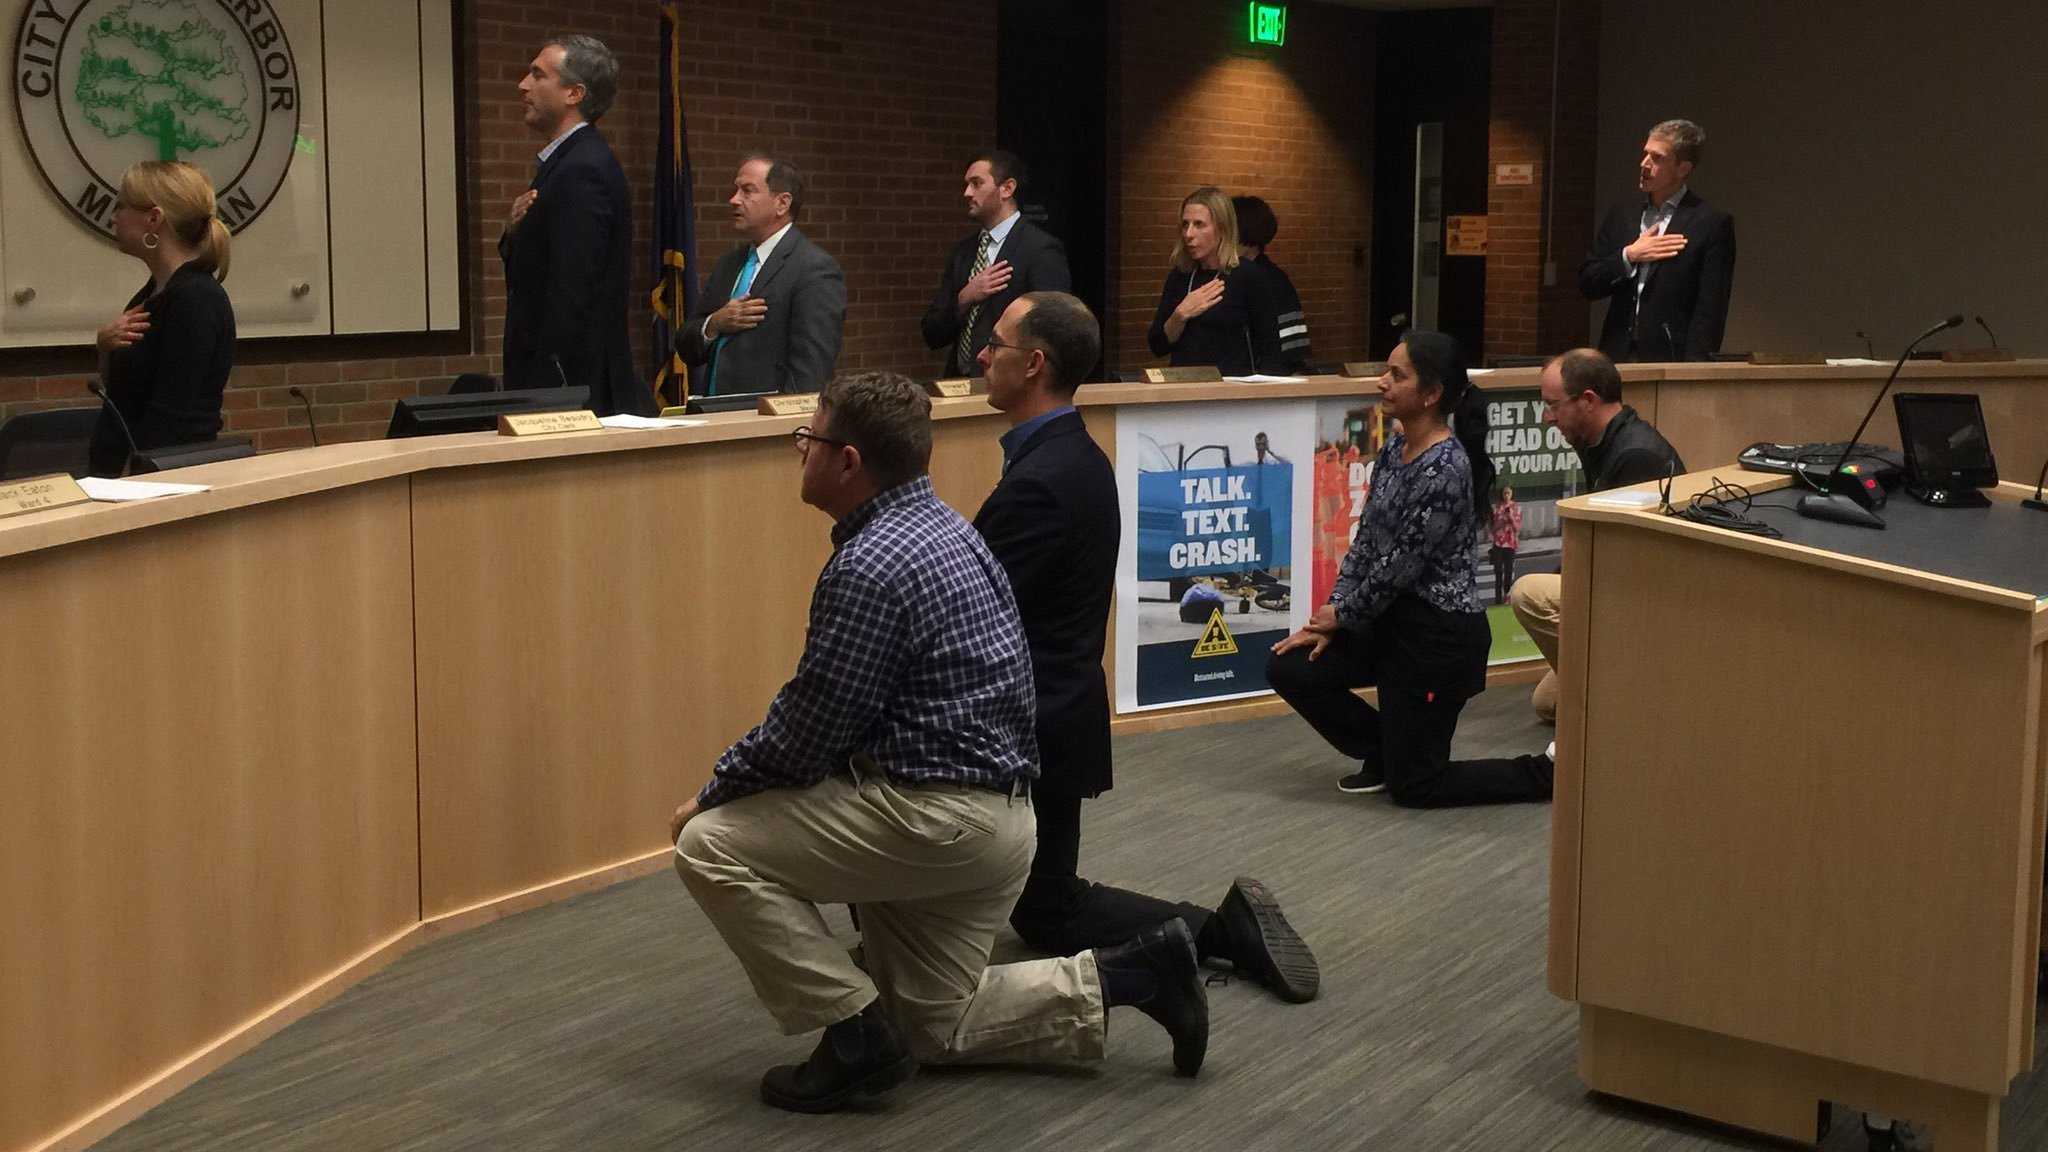 Take a knee protests go from the sidelines to City Council chambers